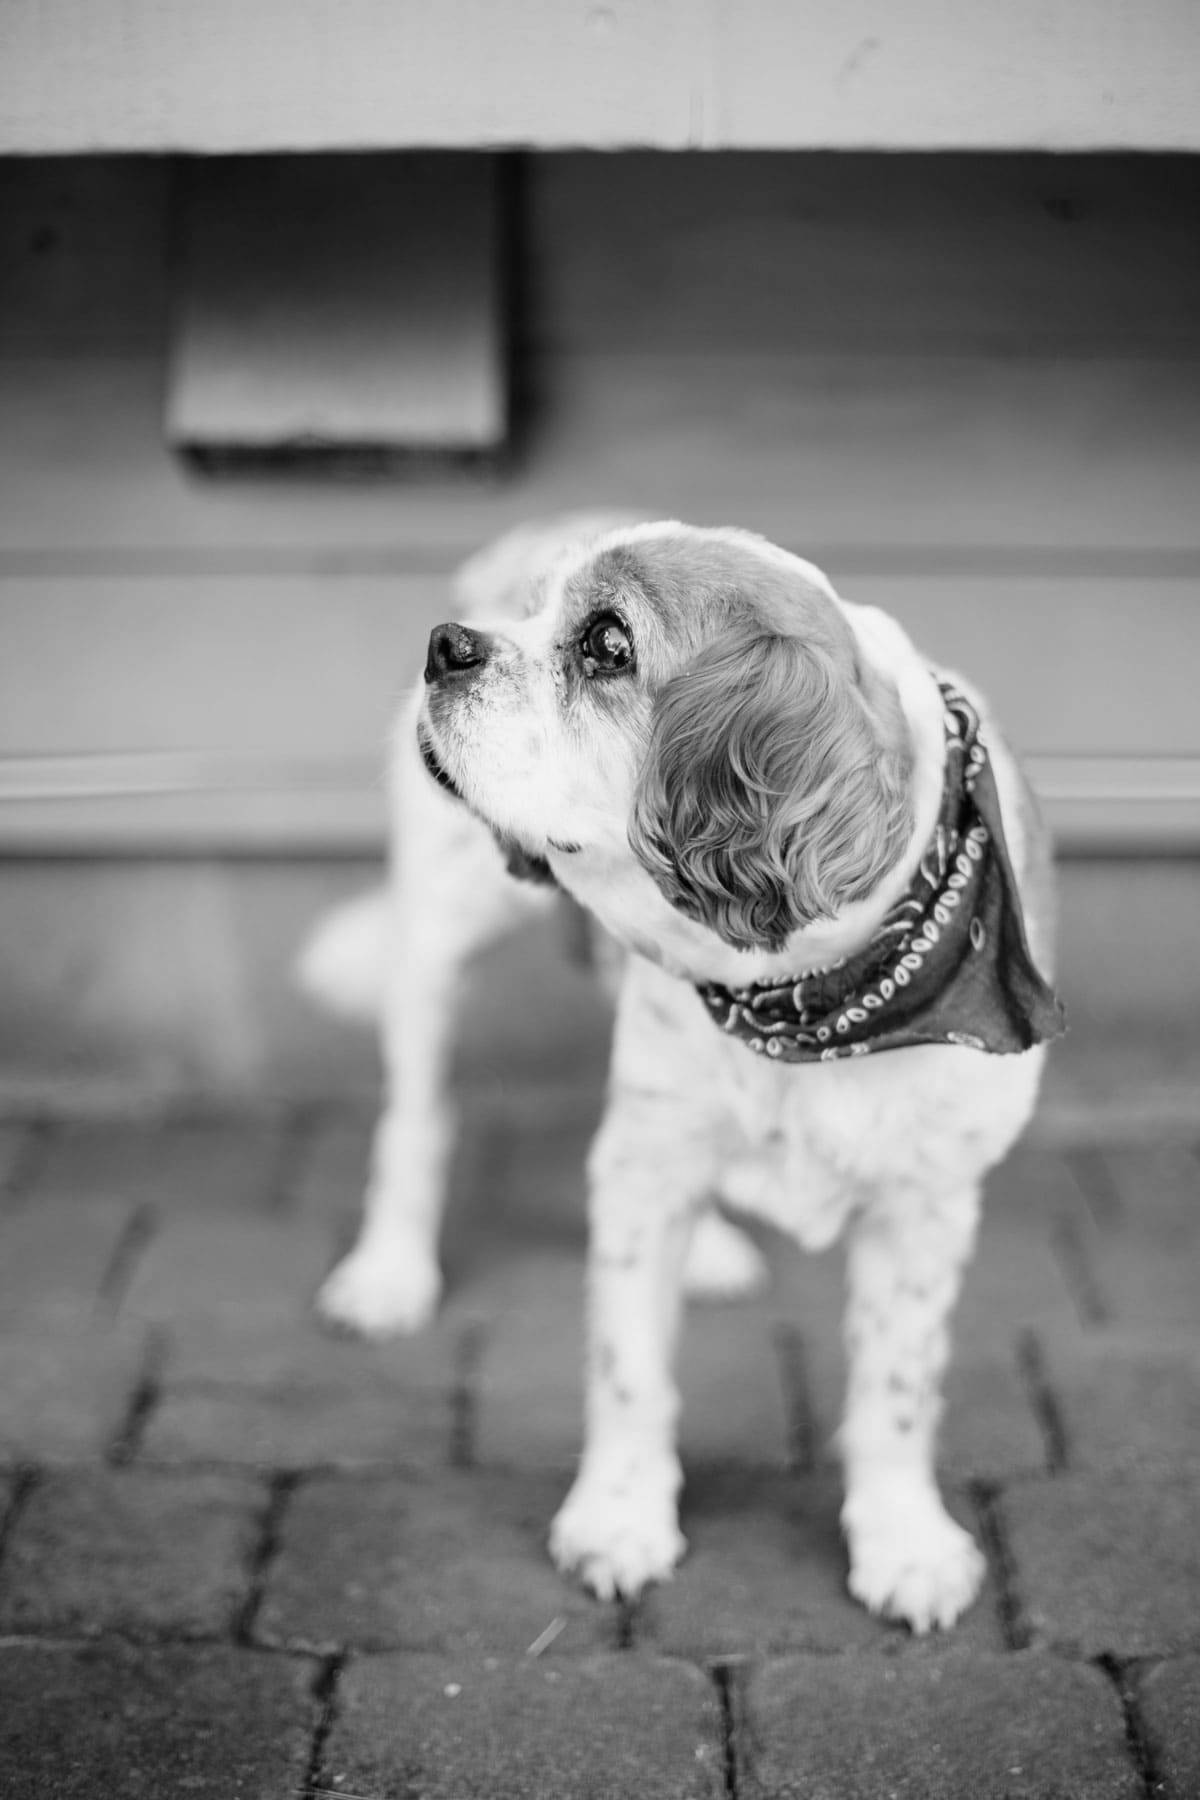 Dog in black and white.